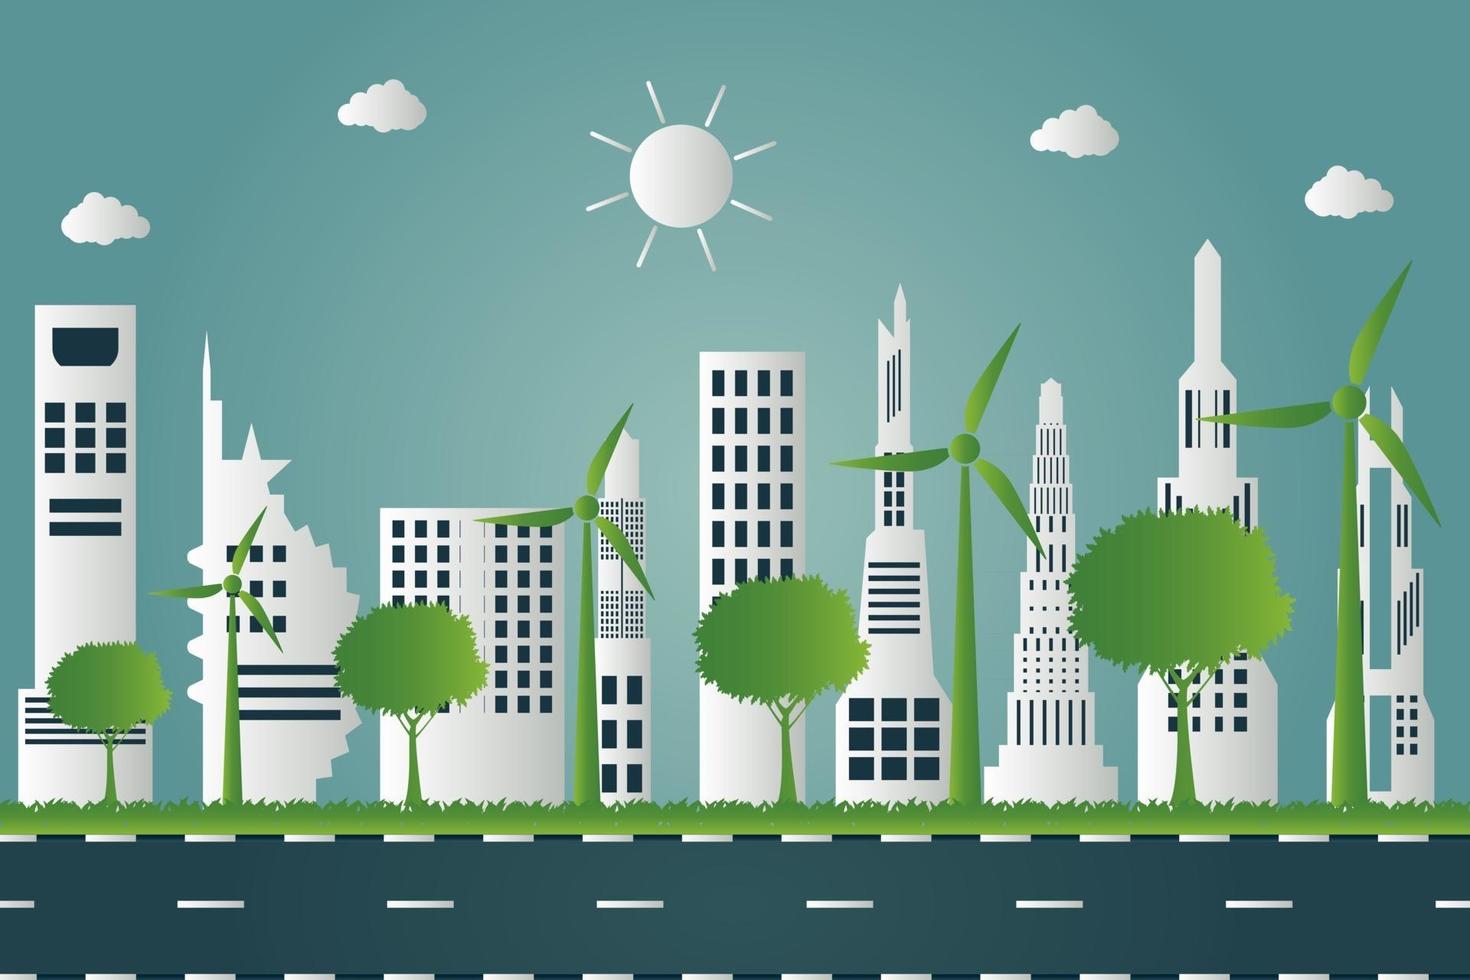 Wind turbines with trees and sun Clean energy with eco friendly concept ideas on city background vector